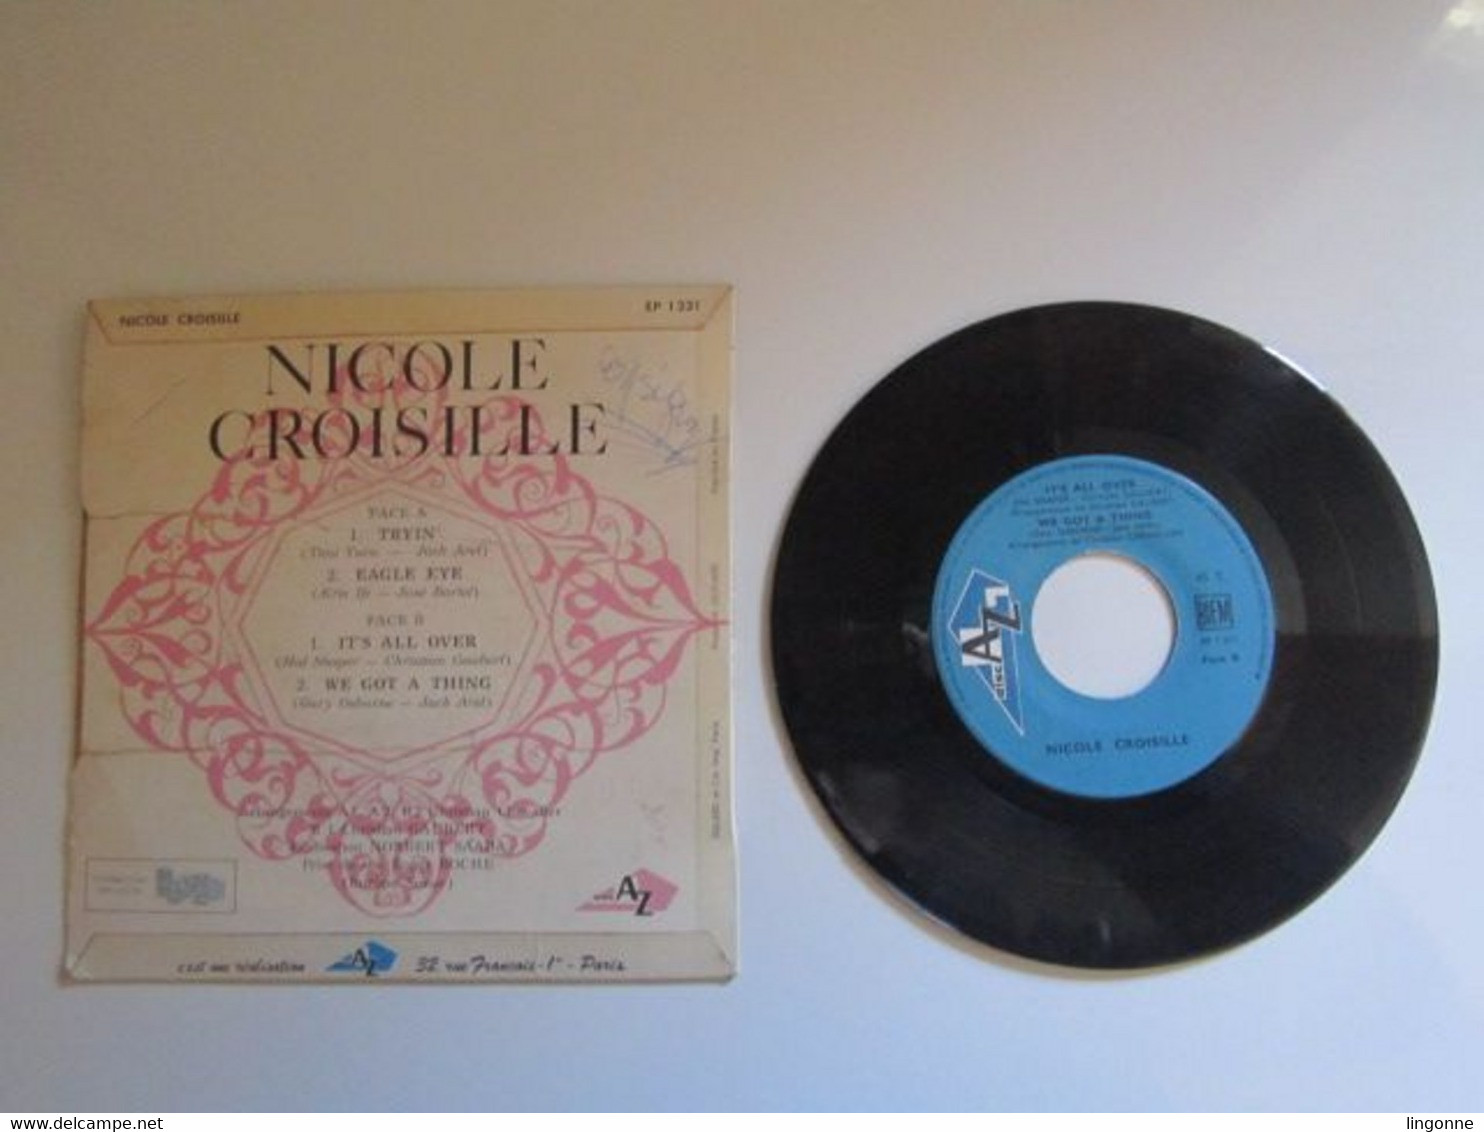 1968 Vinyle 45 Tours Nicole Croisille – Tryin' / Eagle Eye / It's All Over / We Got A Thing - Soul - R&B